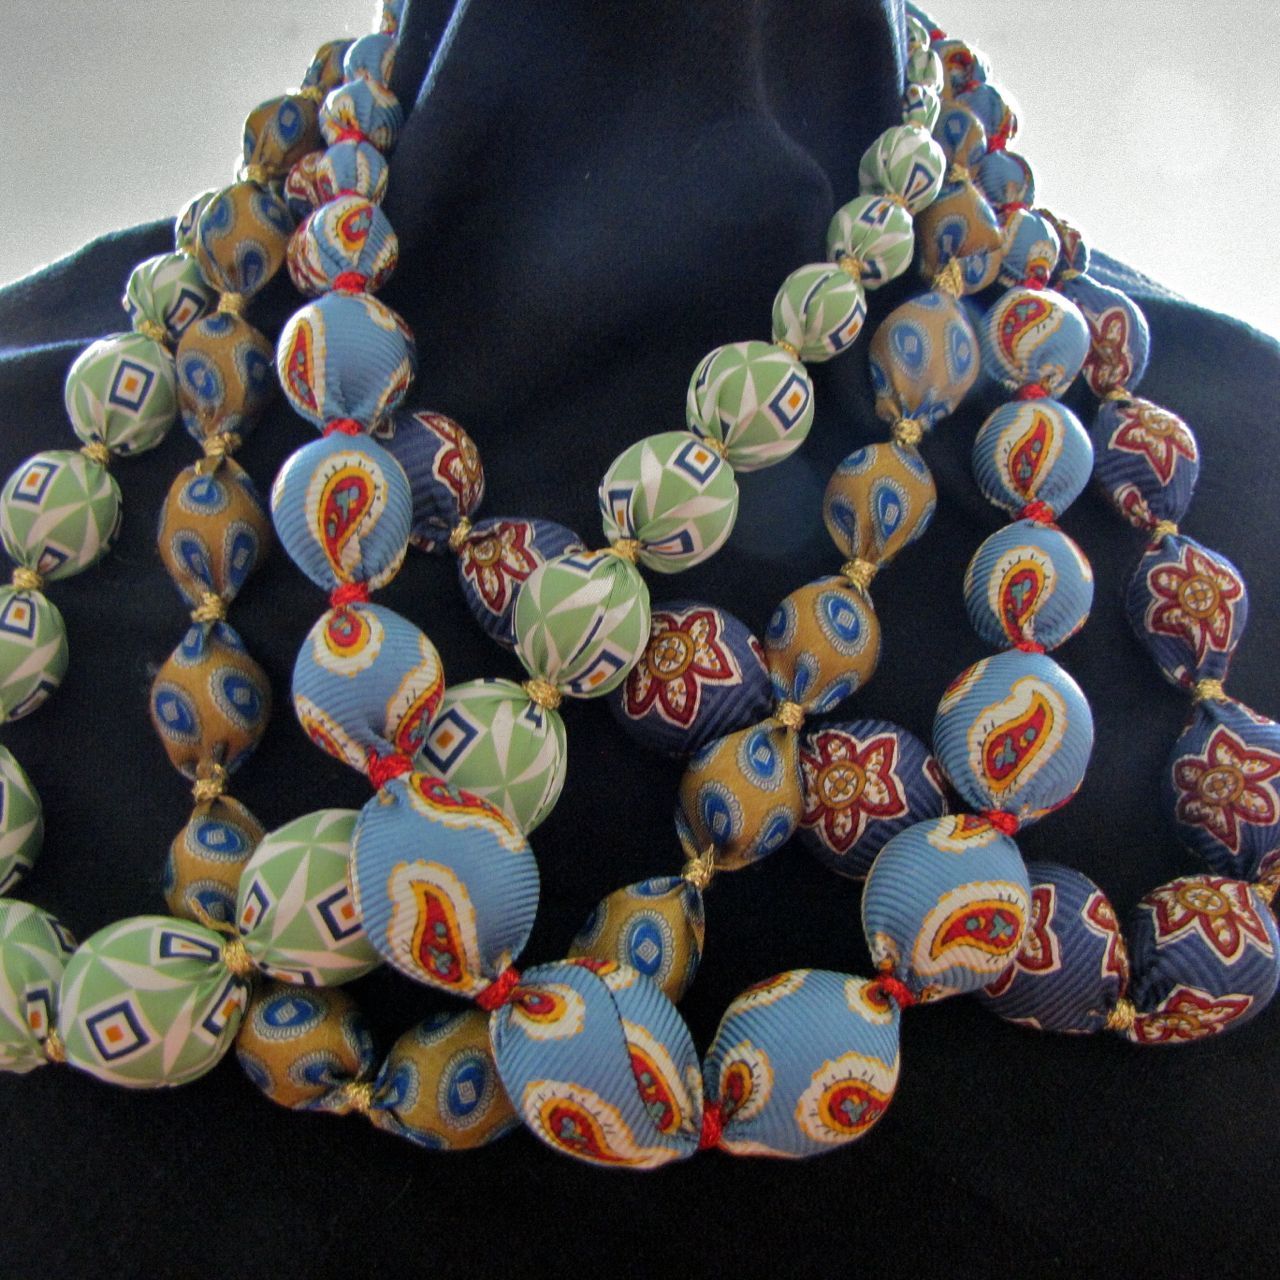 Recycle men's ties into beautiful fabric necklaces.